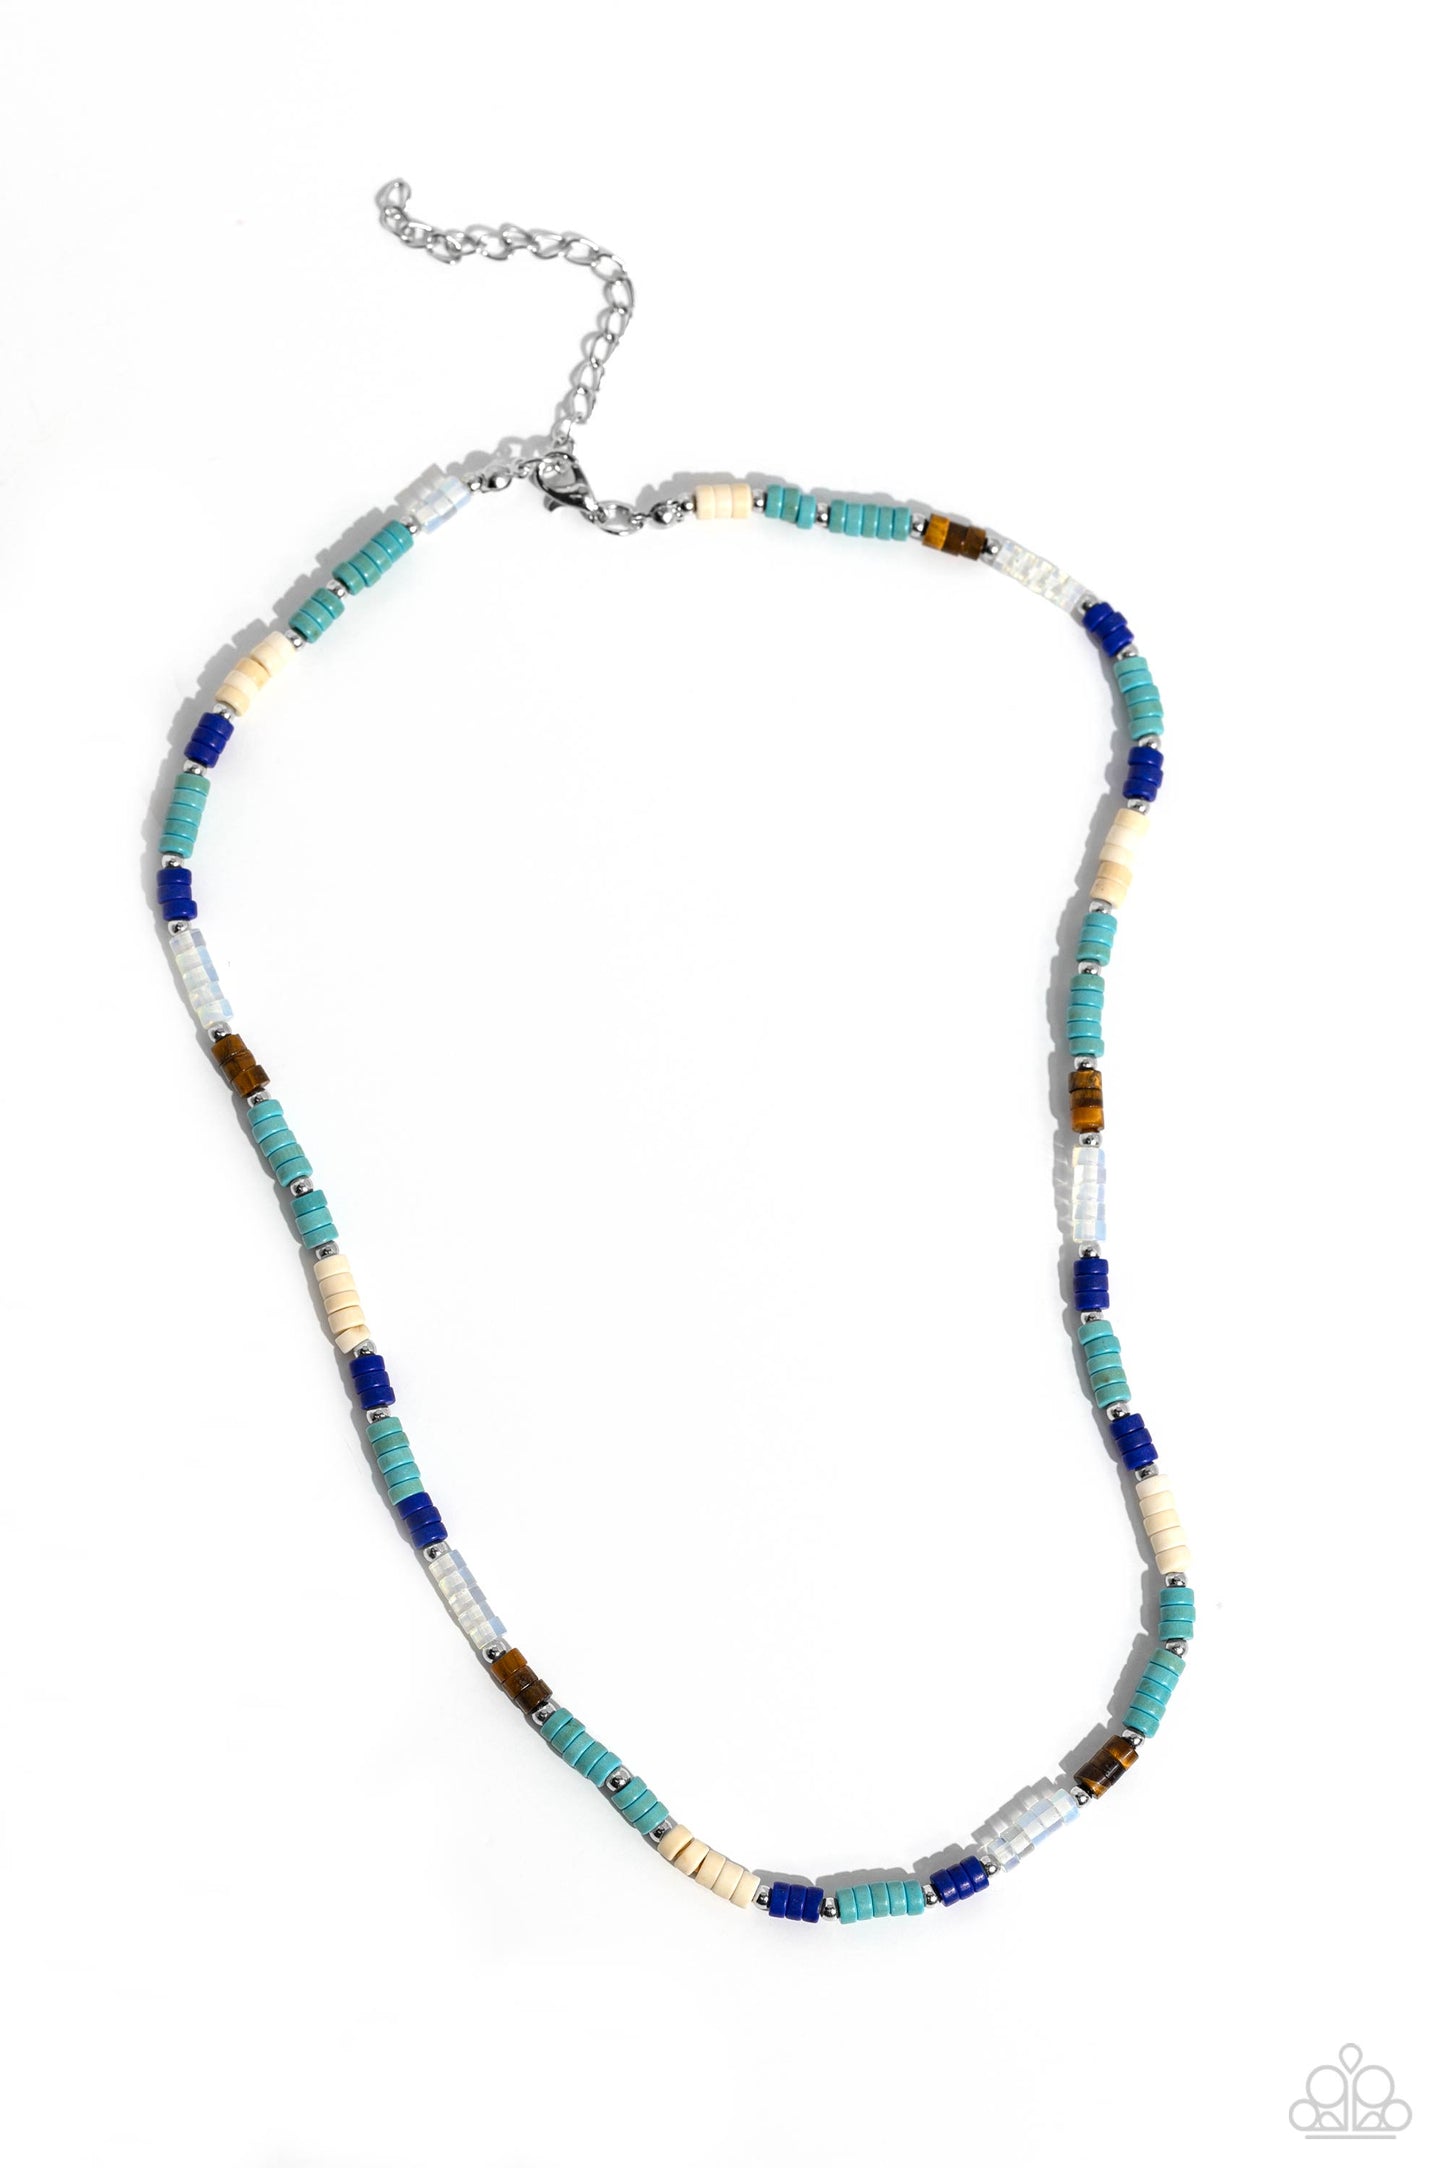 Oasis Outline Blue Necklace - Paparazzi Accessories  Infused with dainty silver accents, multicolored stone discs featuring a startling blue, are threaded along an invisible wire below the collar creating a natural pop of seasonal inspiration. Features an adjustable clasp closure. As the stone elements in this piece are natural, some color variation is normal.  Sold as one individual necklace. Includes one pair of matching earrings.  P2SE-URBL-069XX